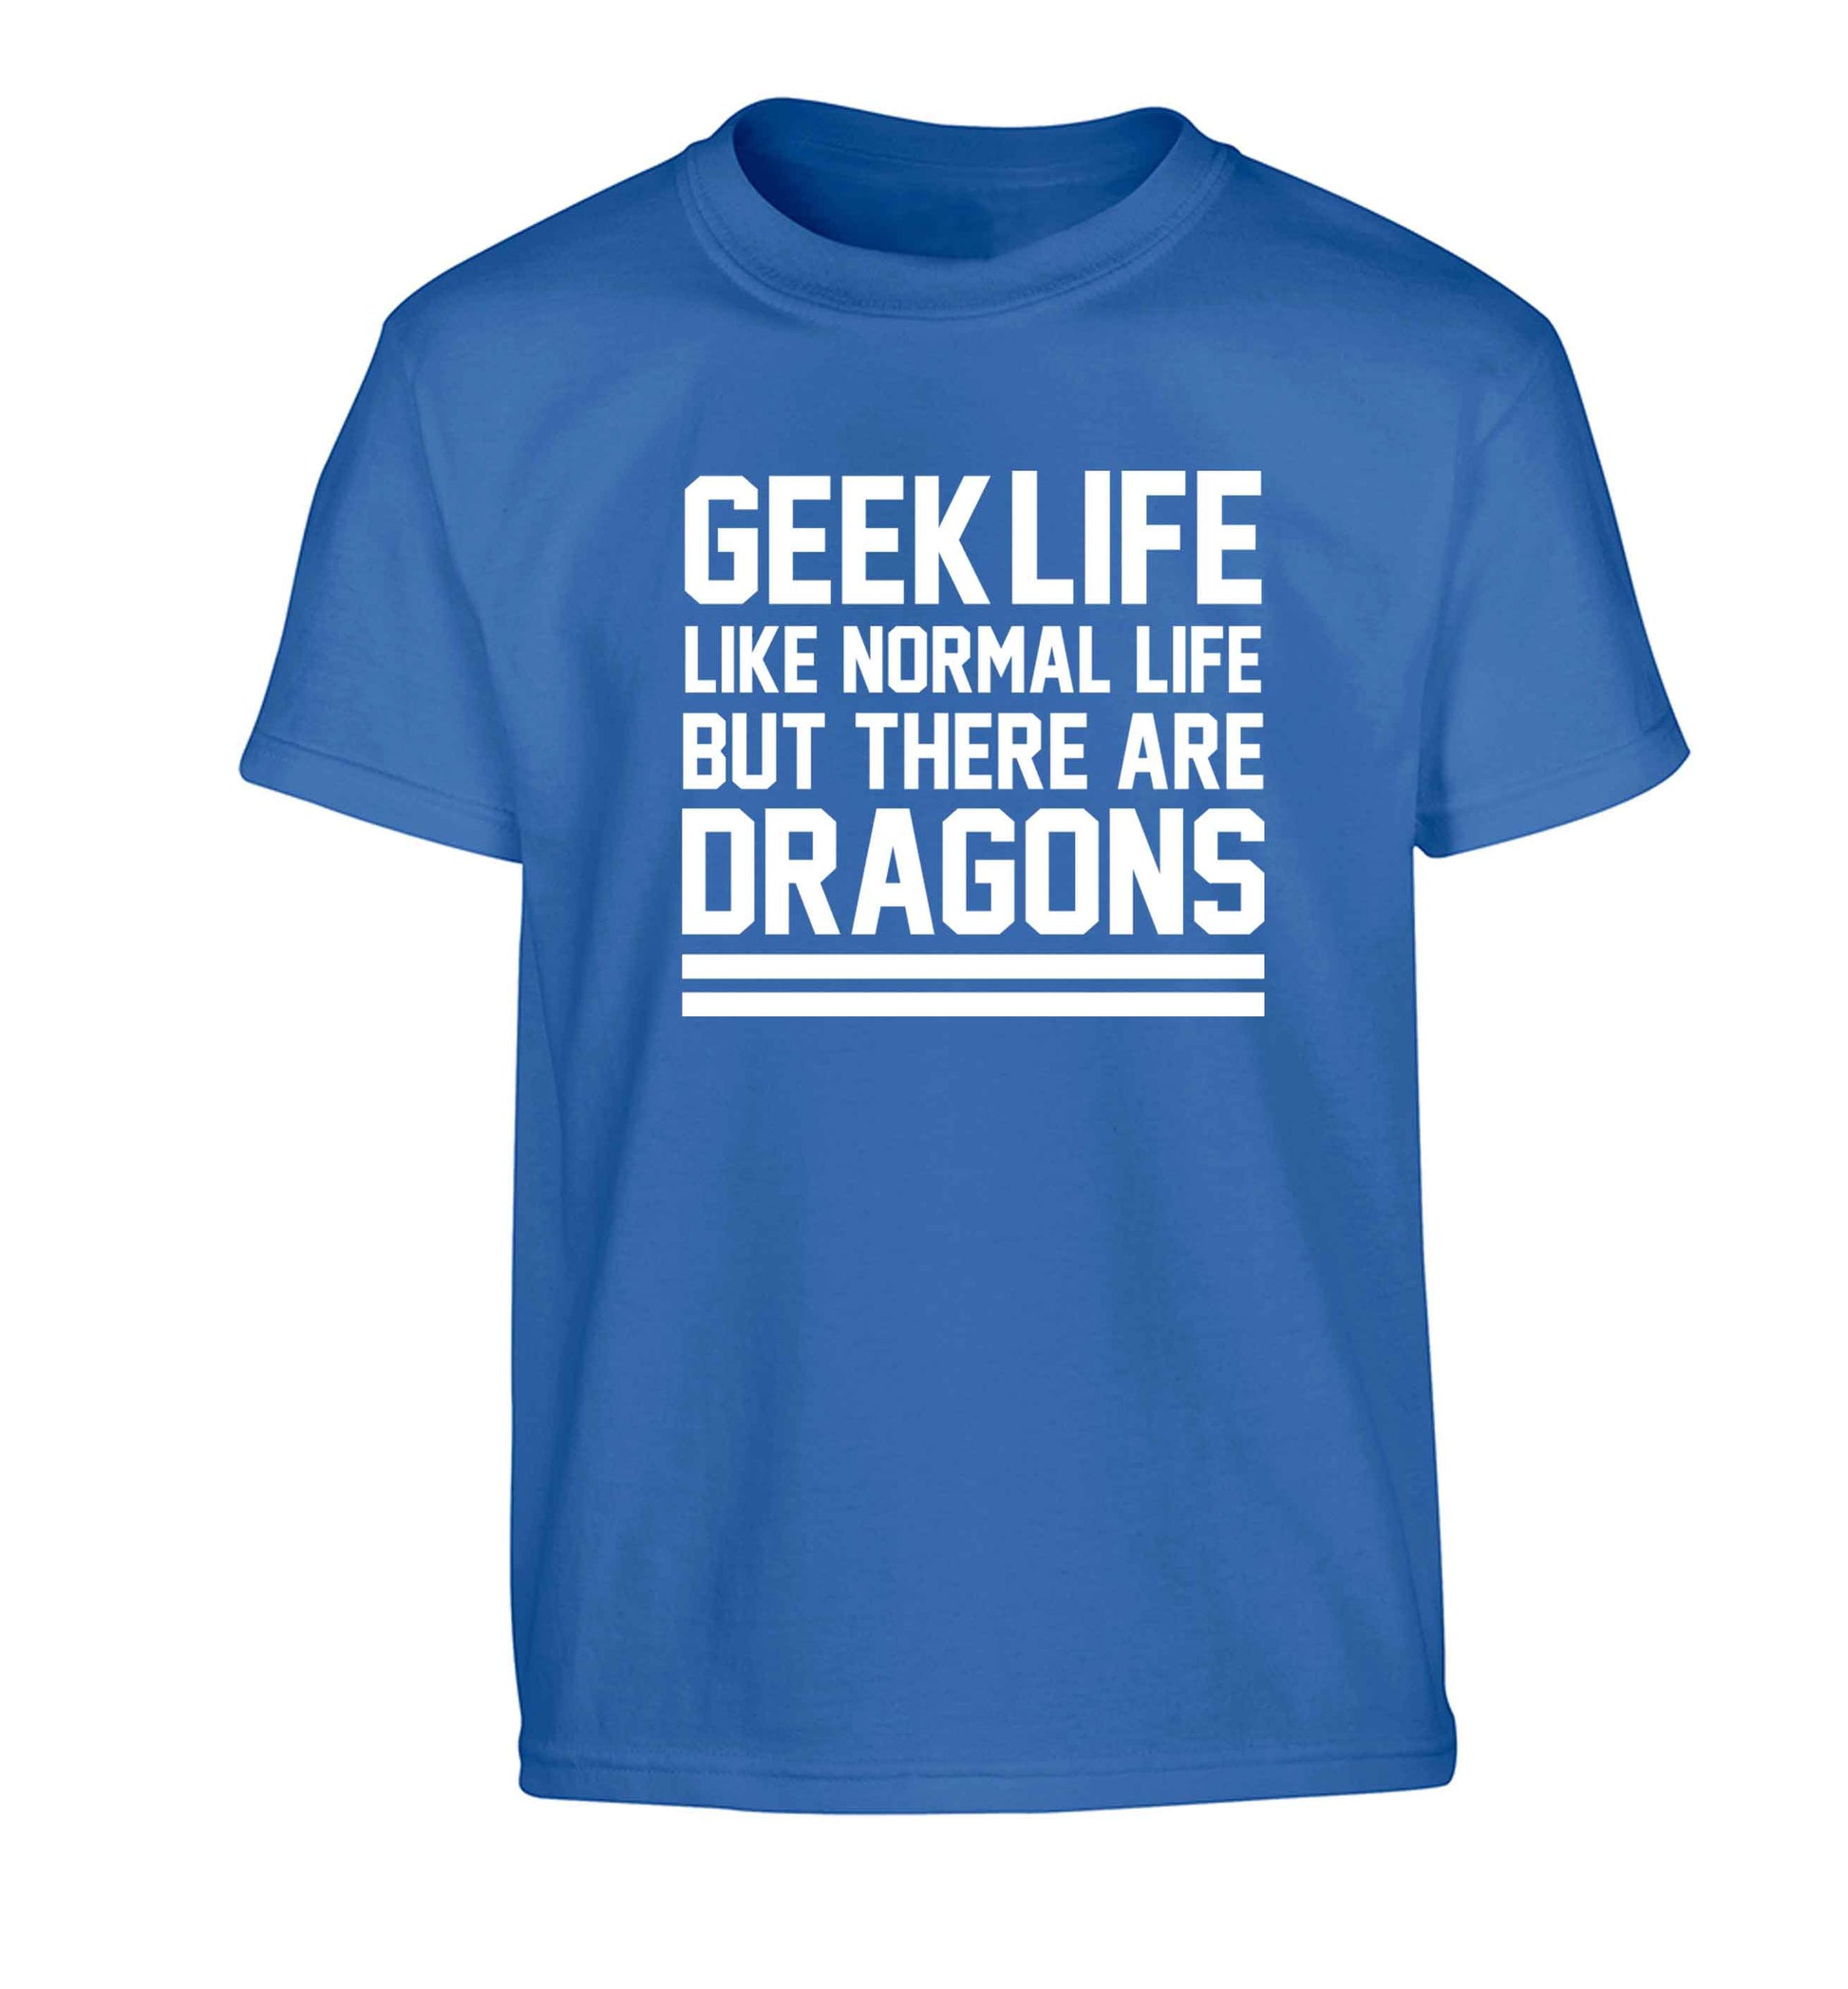 Geek life like normal life but there are dragons Children's blue Tshirt 12-13 Years